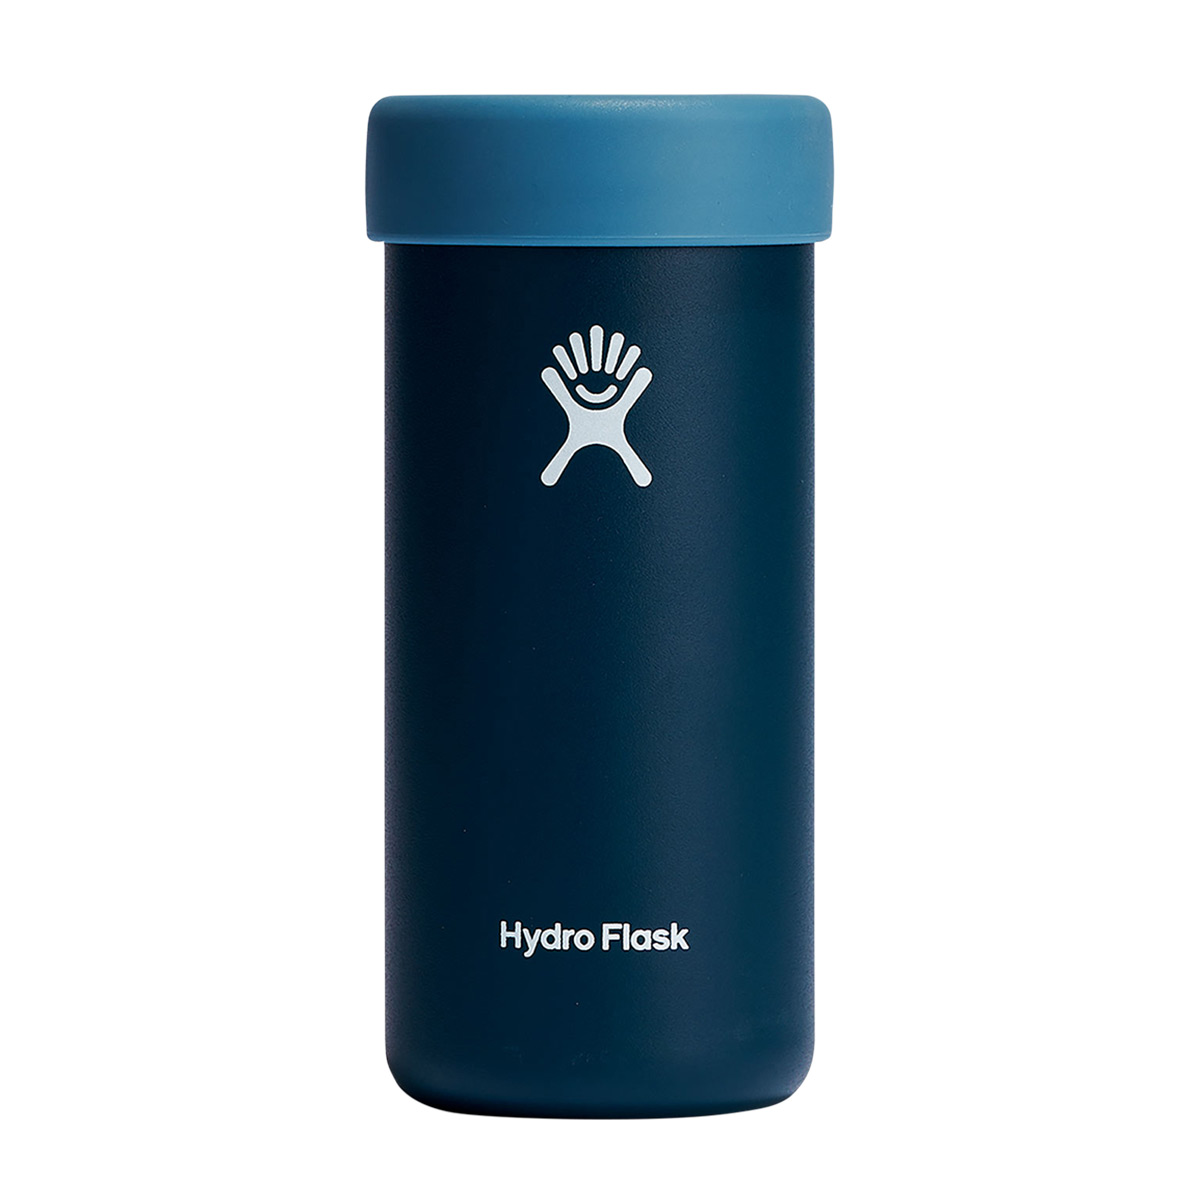 New Hydro Flask Cooler Cups & New Colors for Spring! - Thrifty NW Mom